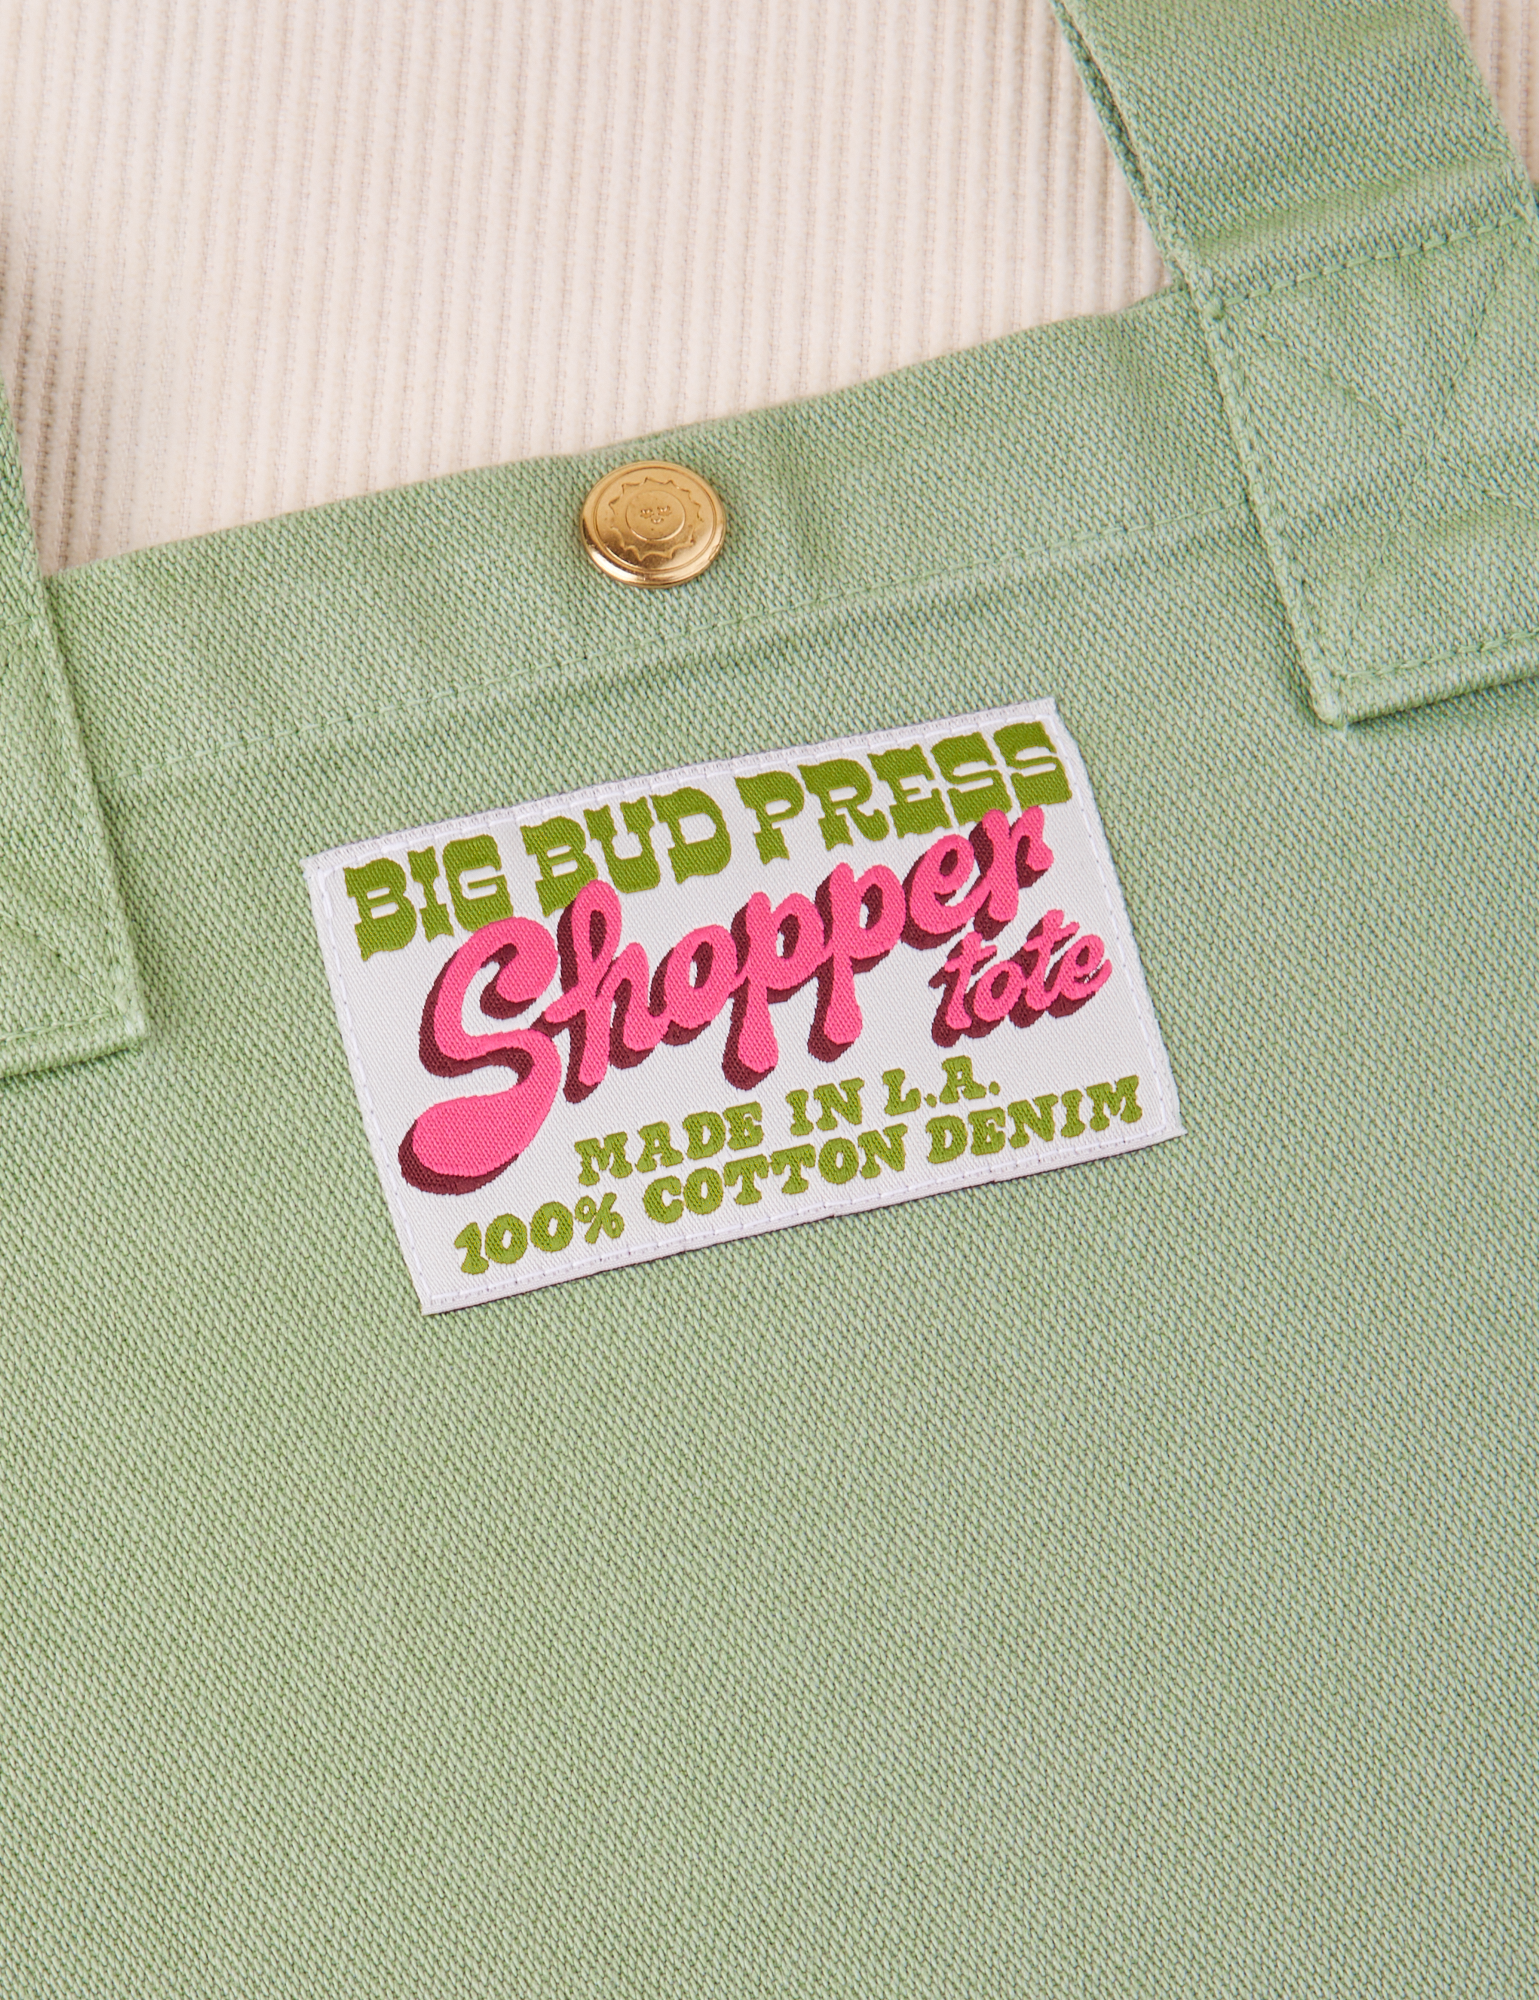 Sun Baby brass snap on Shopper Tote Bag in Sage Green. Bag label with green and pink text that reads &quot;Big Bud Press Shopper Tote, Made in L.A., 100% Cotton Denim&quot; on white background